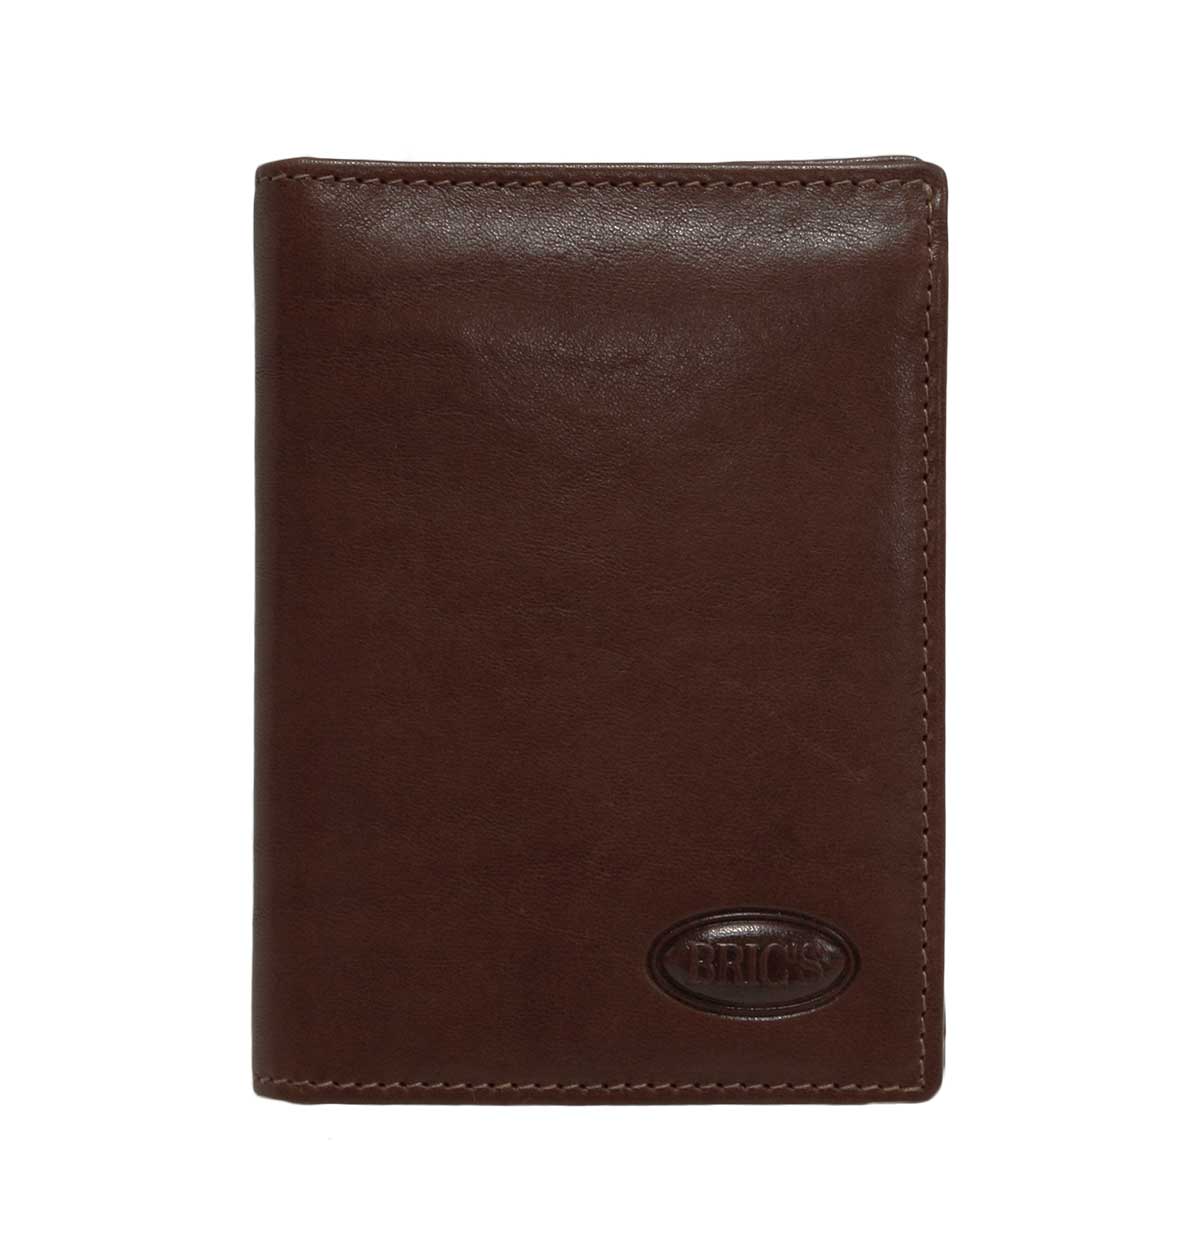 Monte Rosa Flip-Up Vertical Wallet With Id by Brics (Color: Dark Brown)